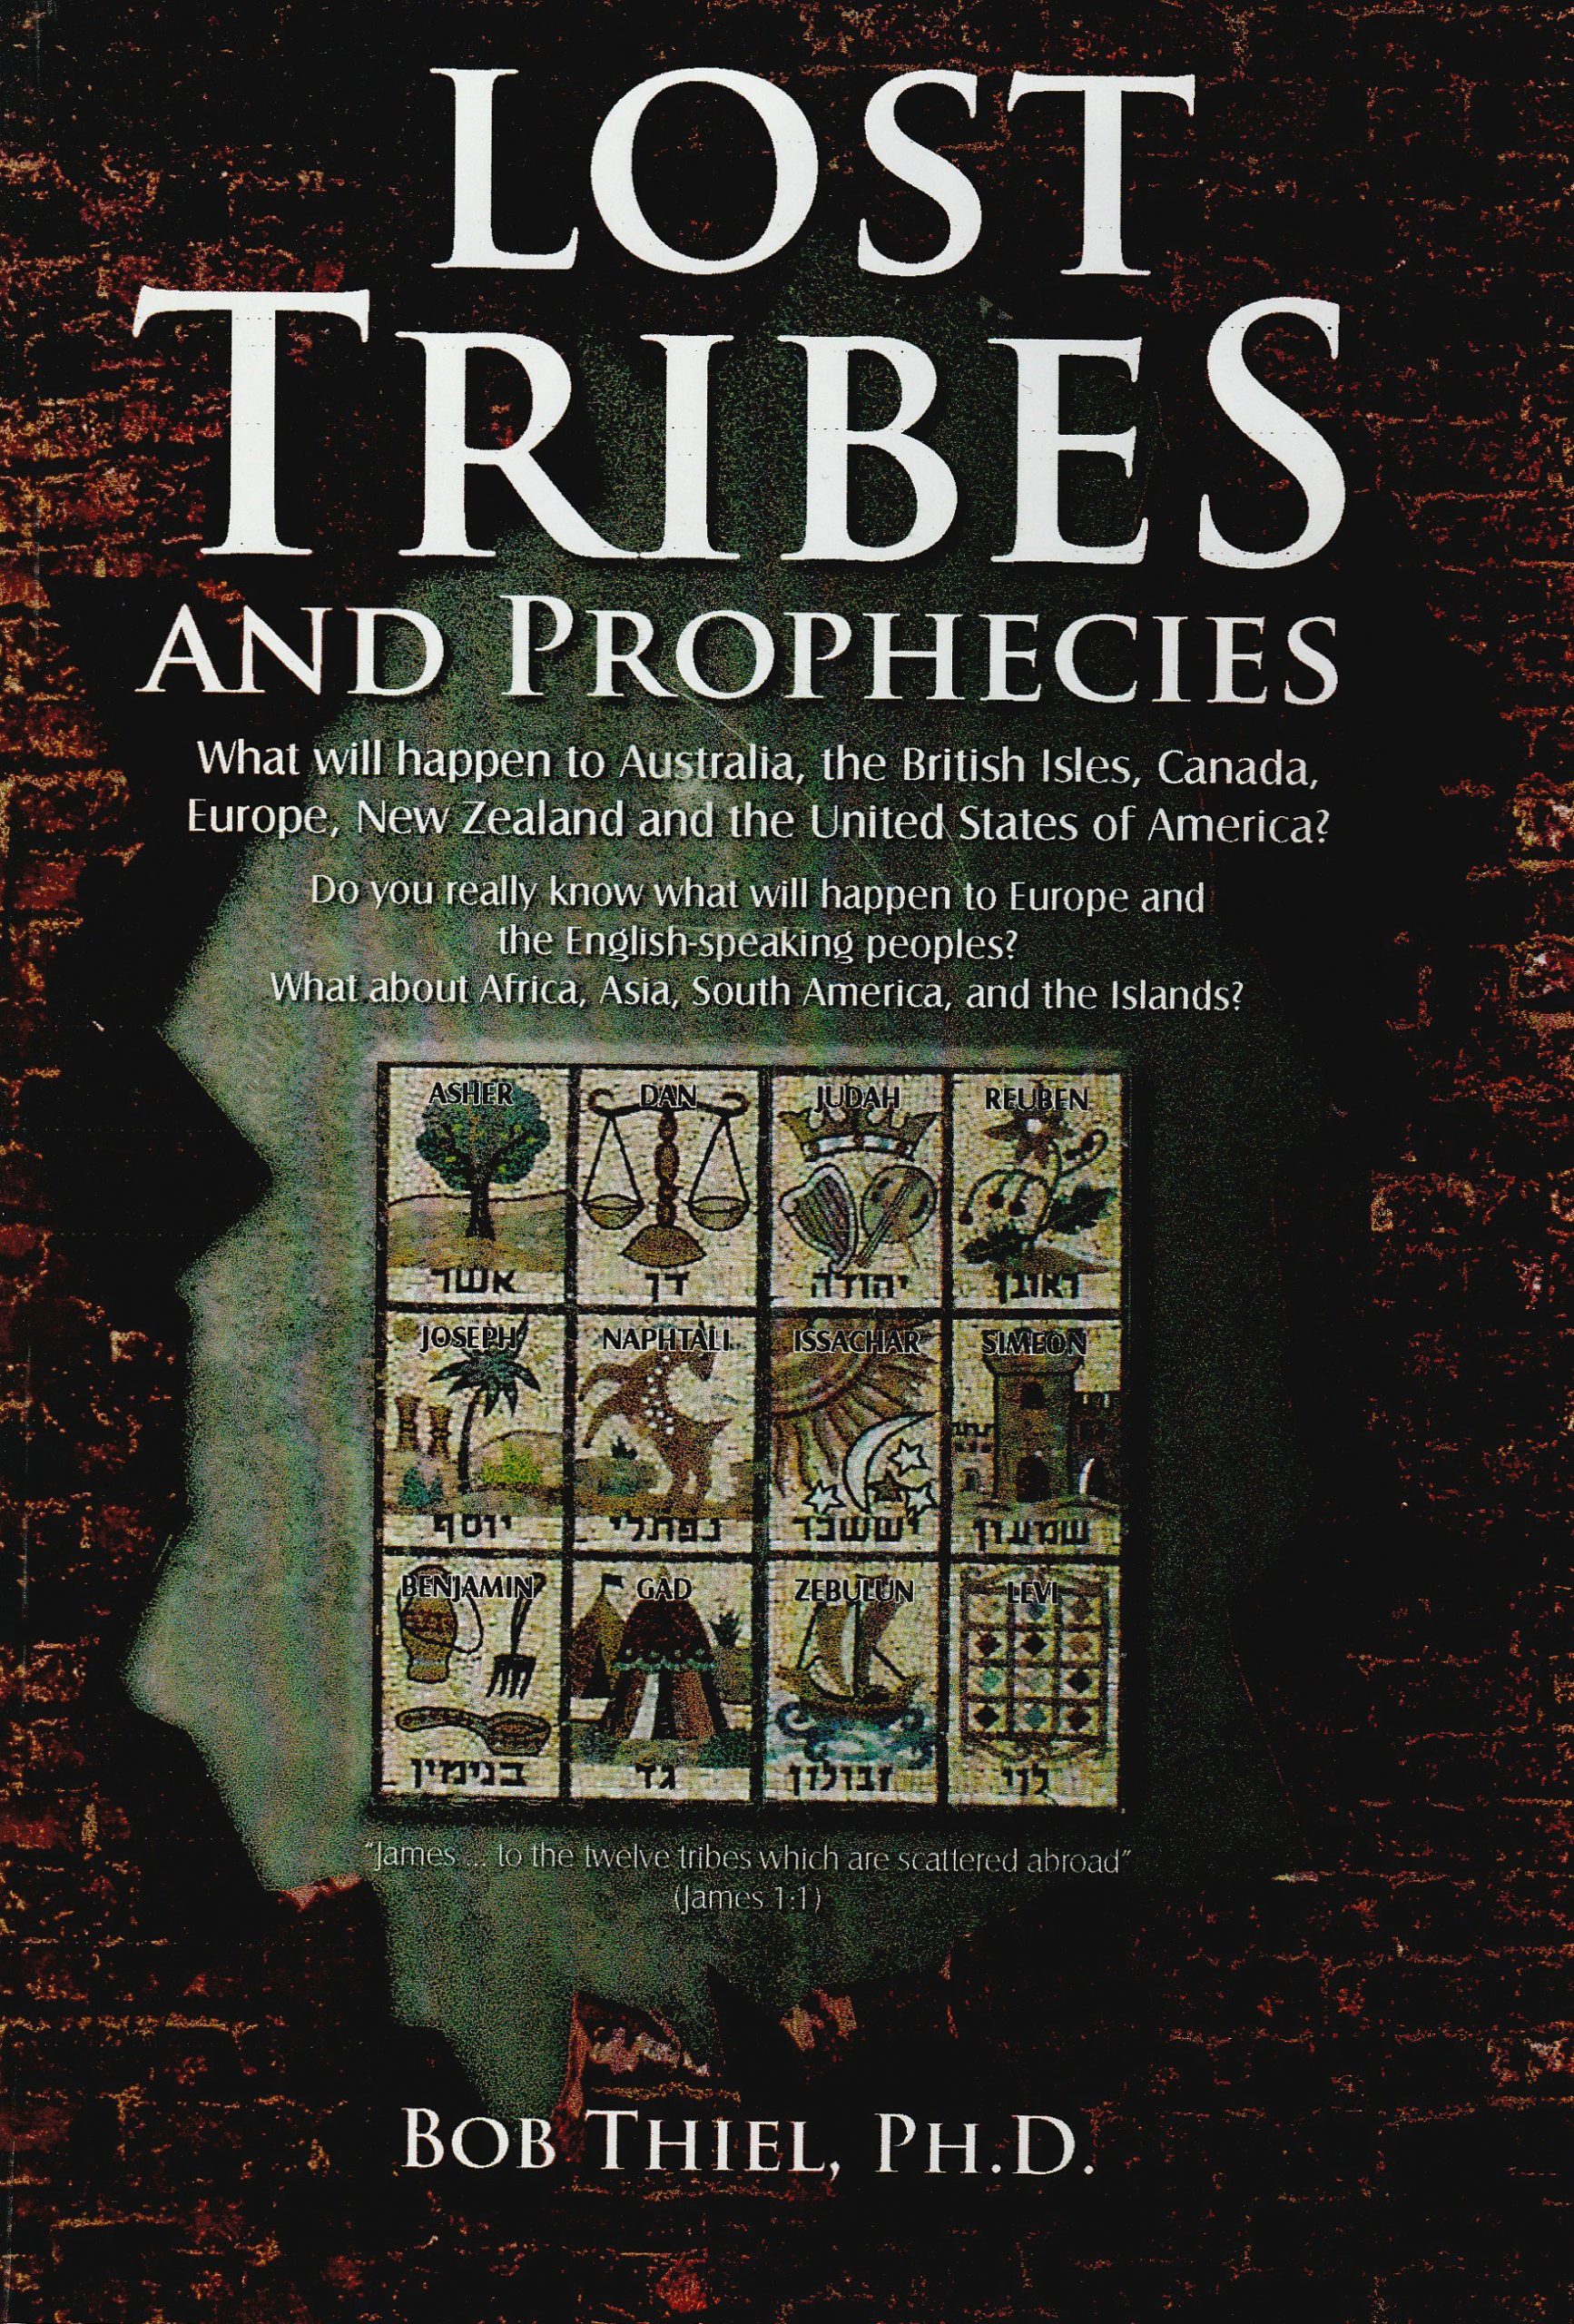 Lost tribes, the Bible, and DNA